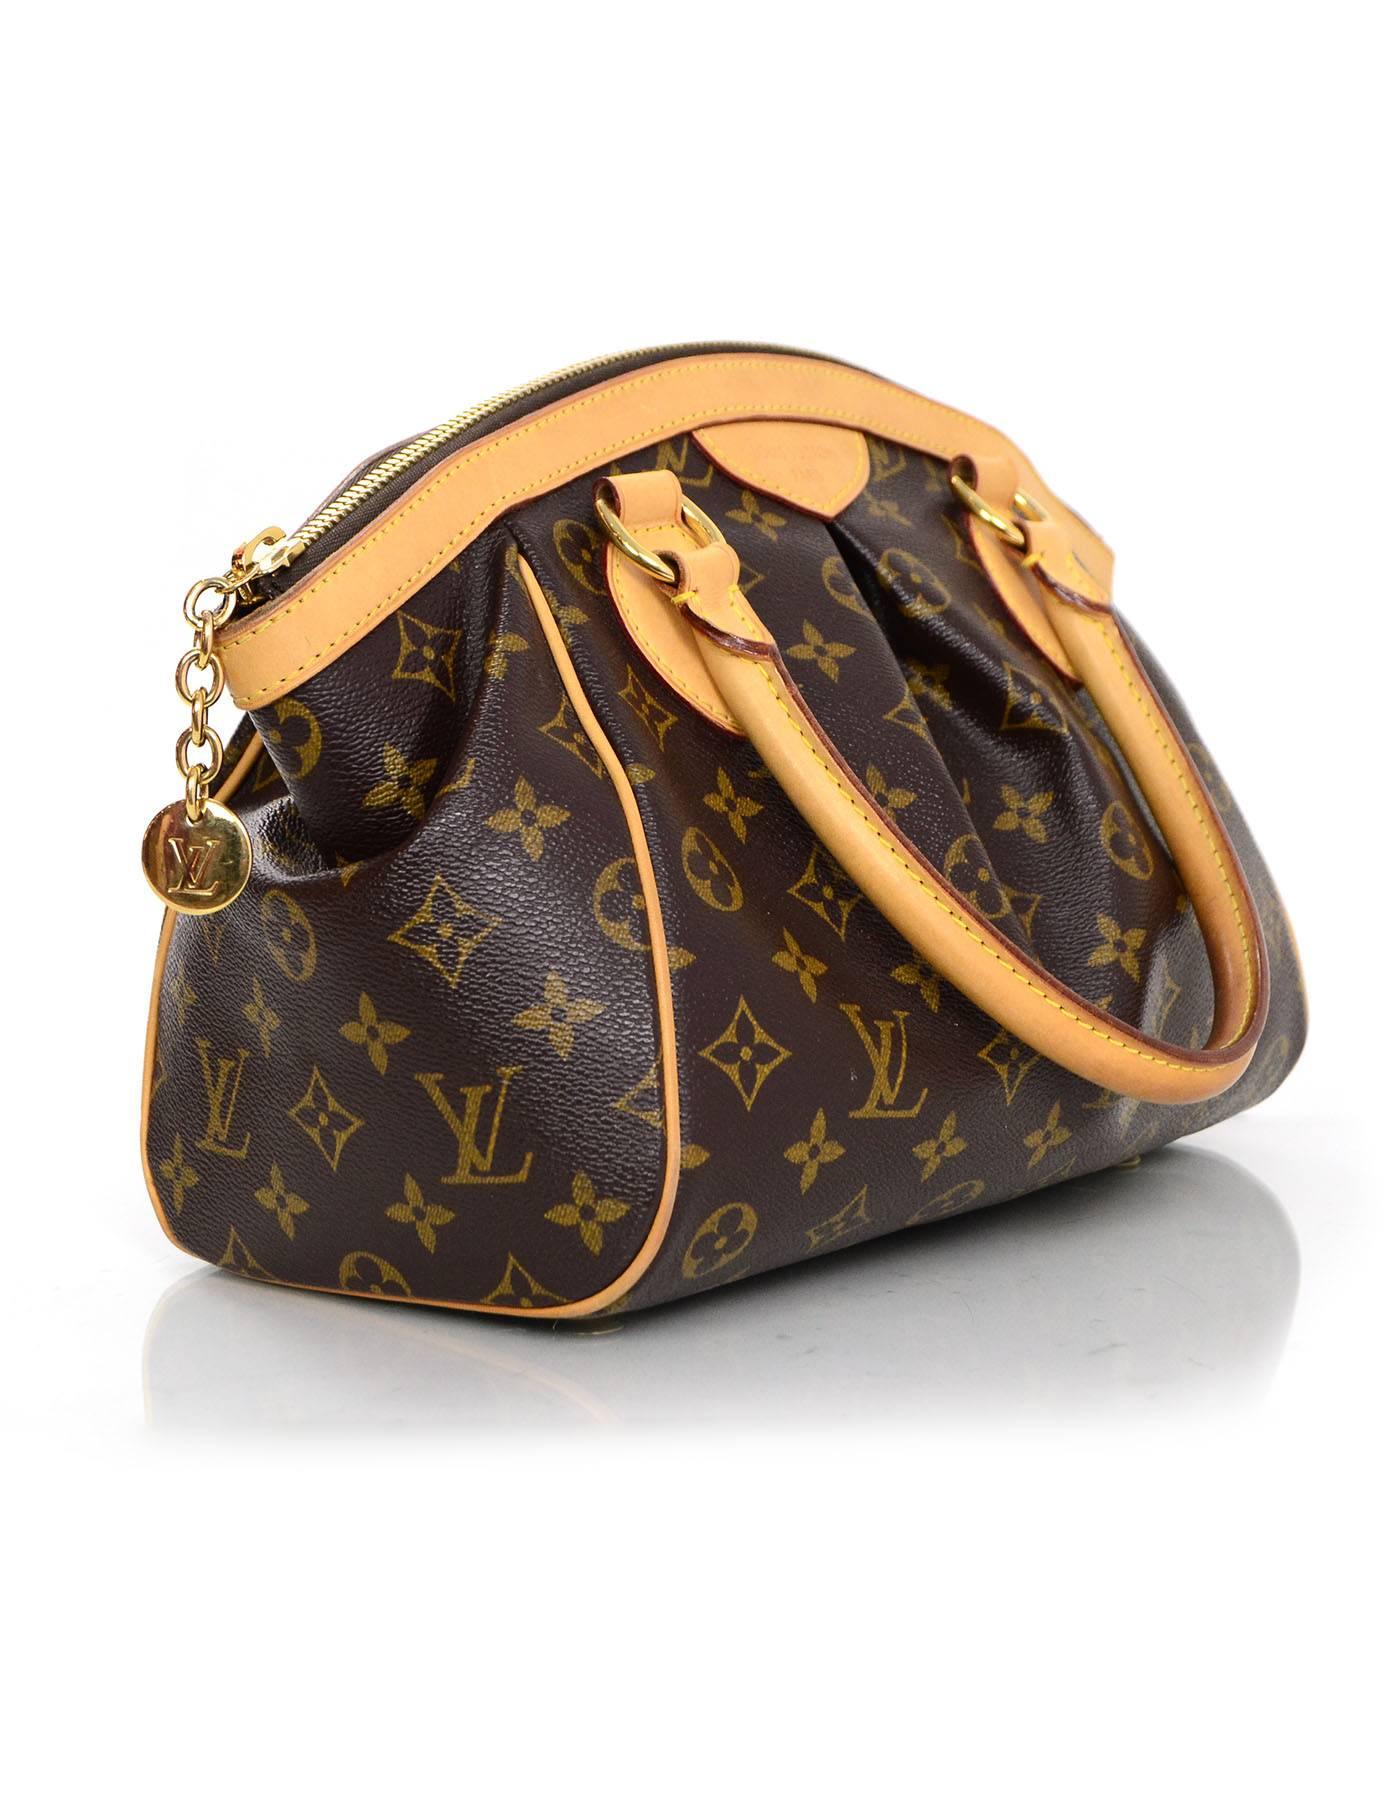 Louis Vuitton Monogram Tivoli PM Bag

Made In: U.S.A
Year of Production: 2009
Color: Brown
Hardware: Goldtone
Materials: Coated canvas and vachetta leather
Lining: Brown textile
Closure/Opening: Zip top with goldtone chain and LV logo charm
Exterior